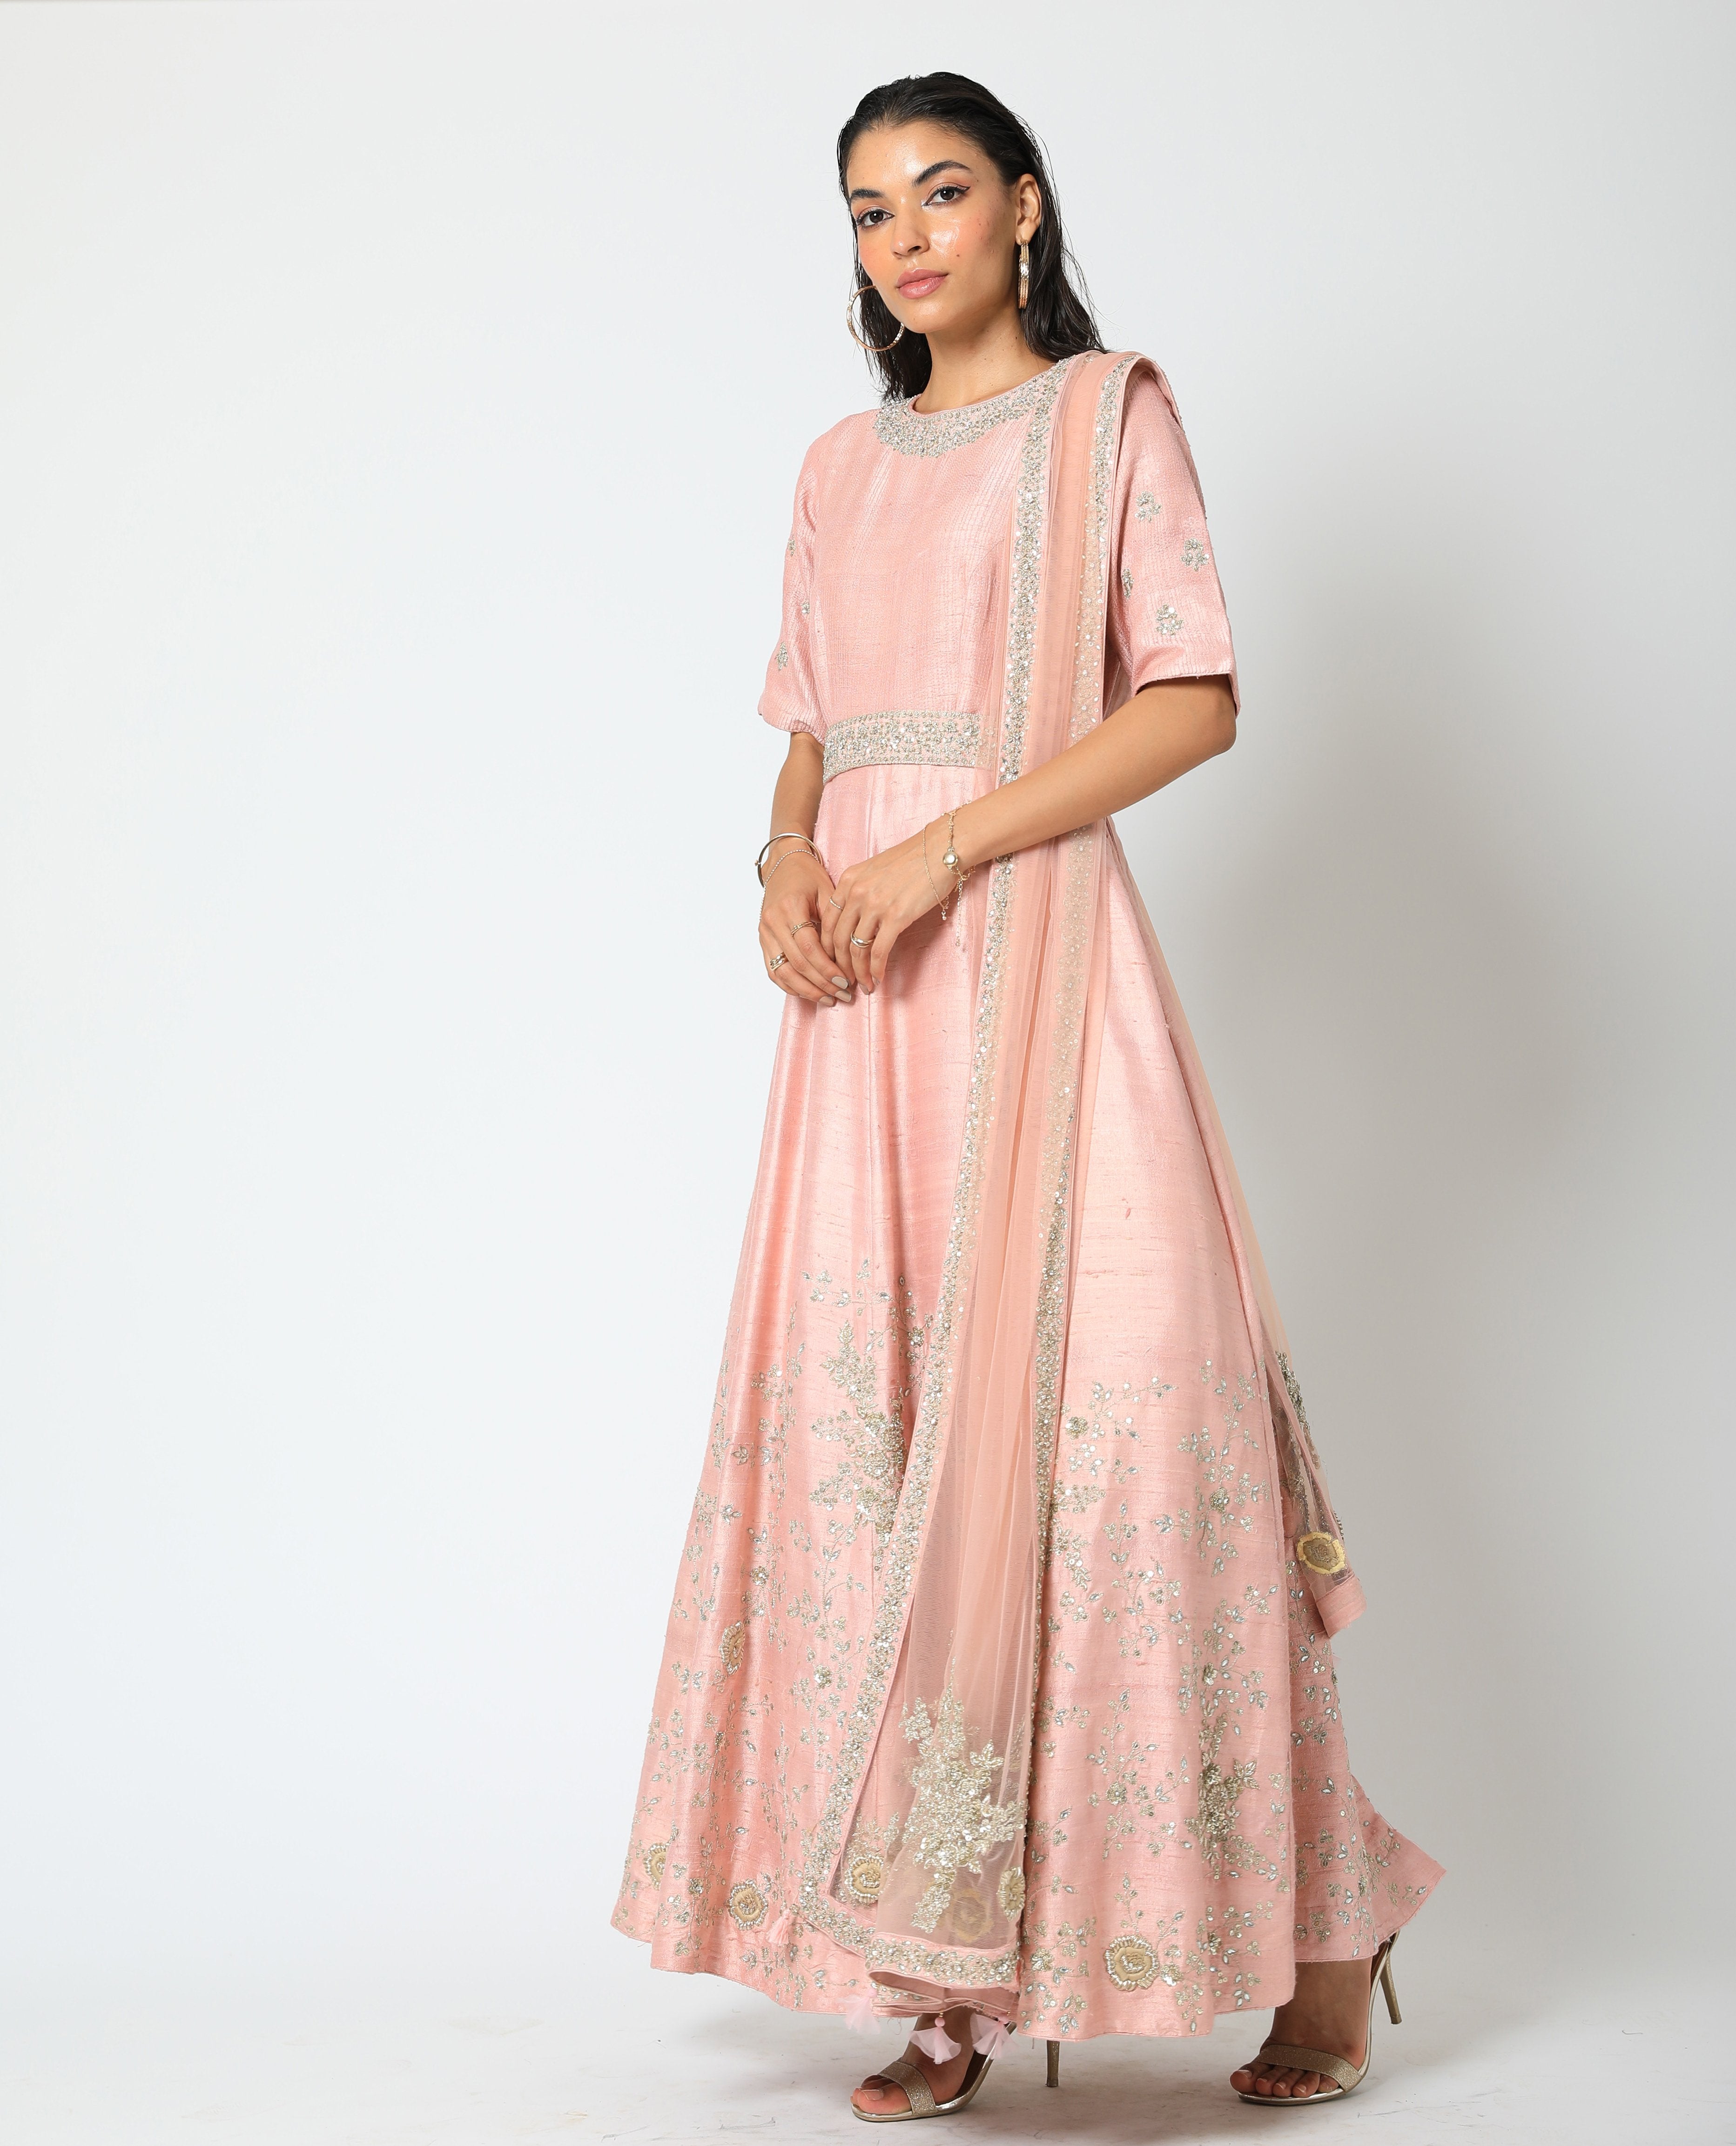 Romaa - Peach Embroidered Gown With Dupatta